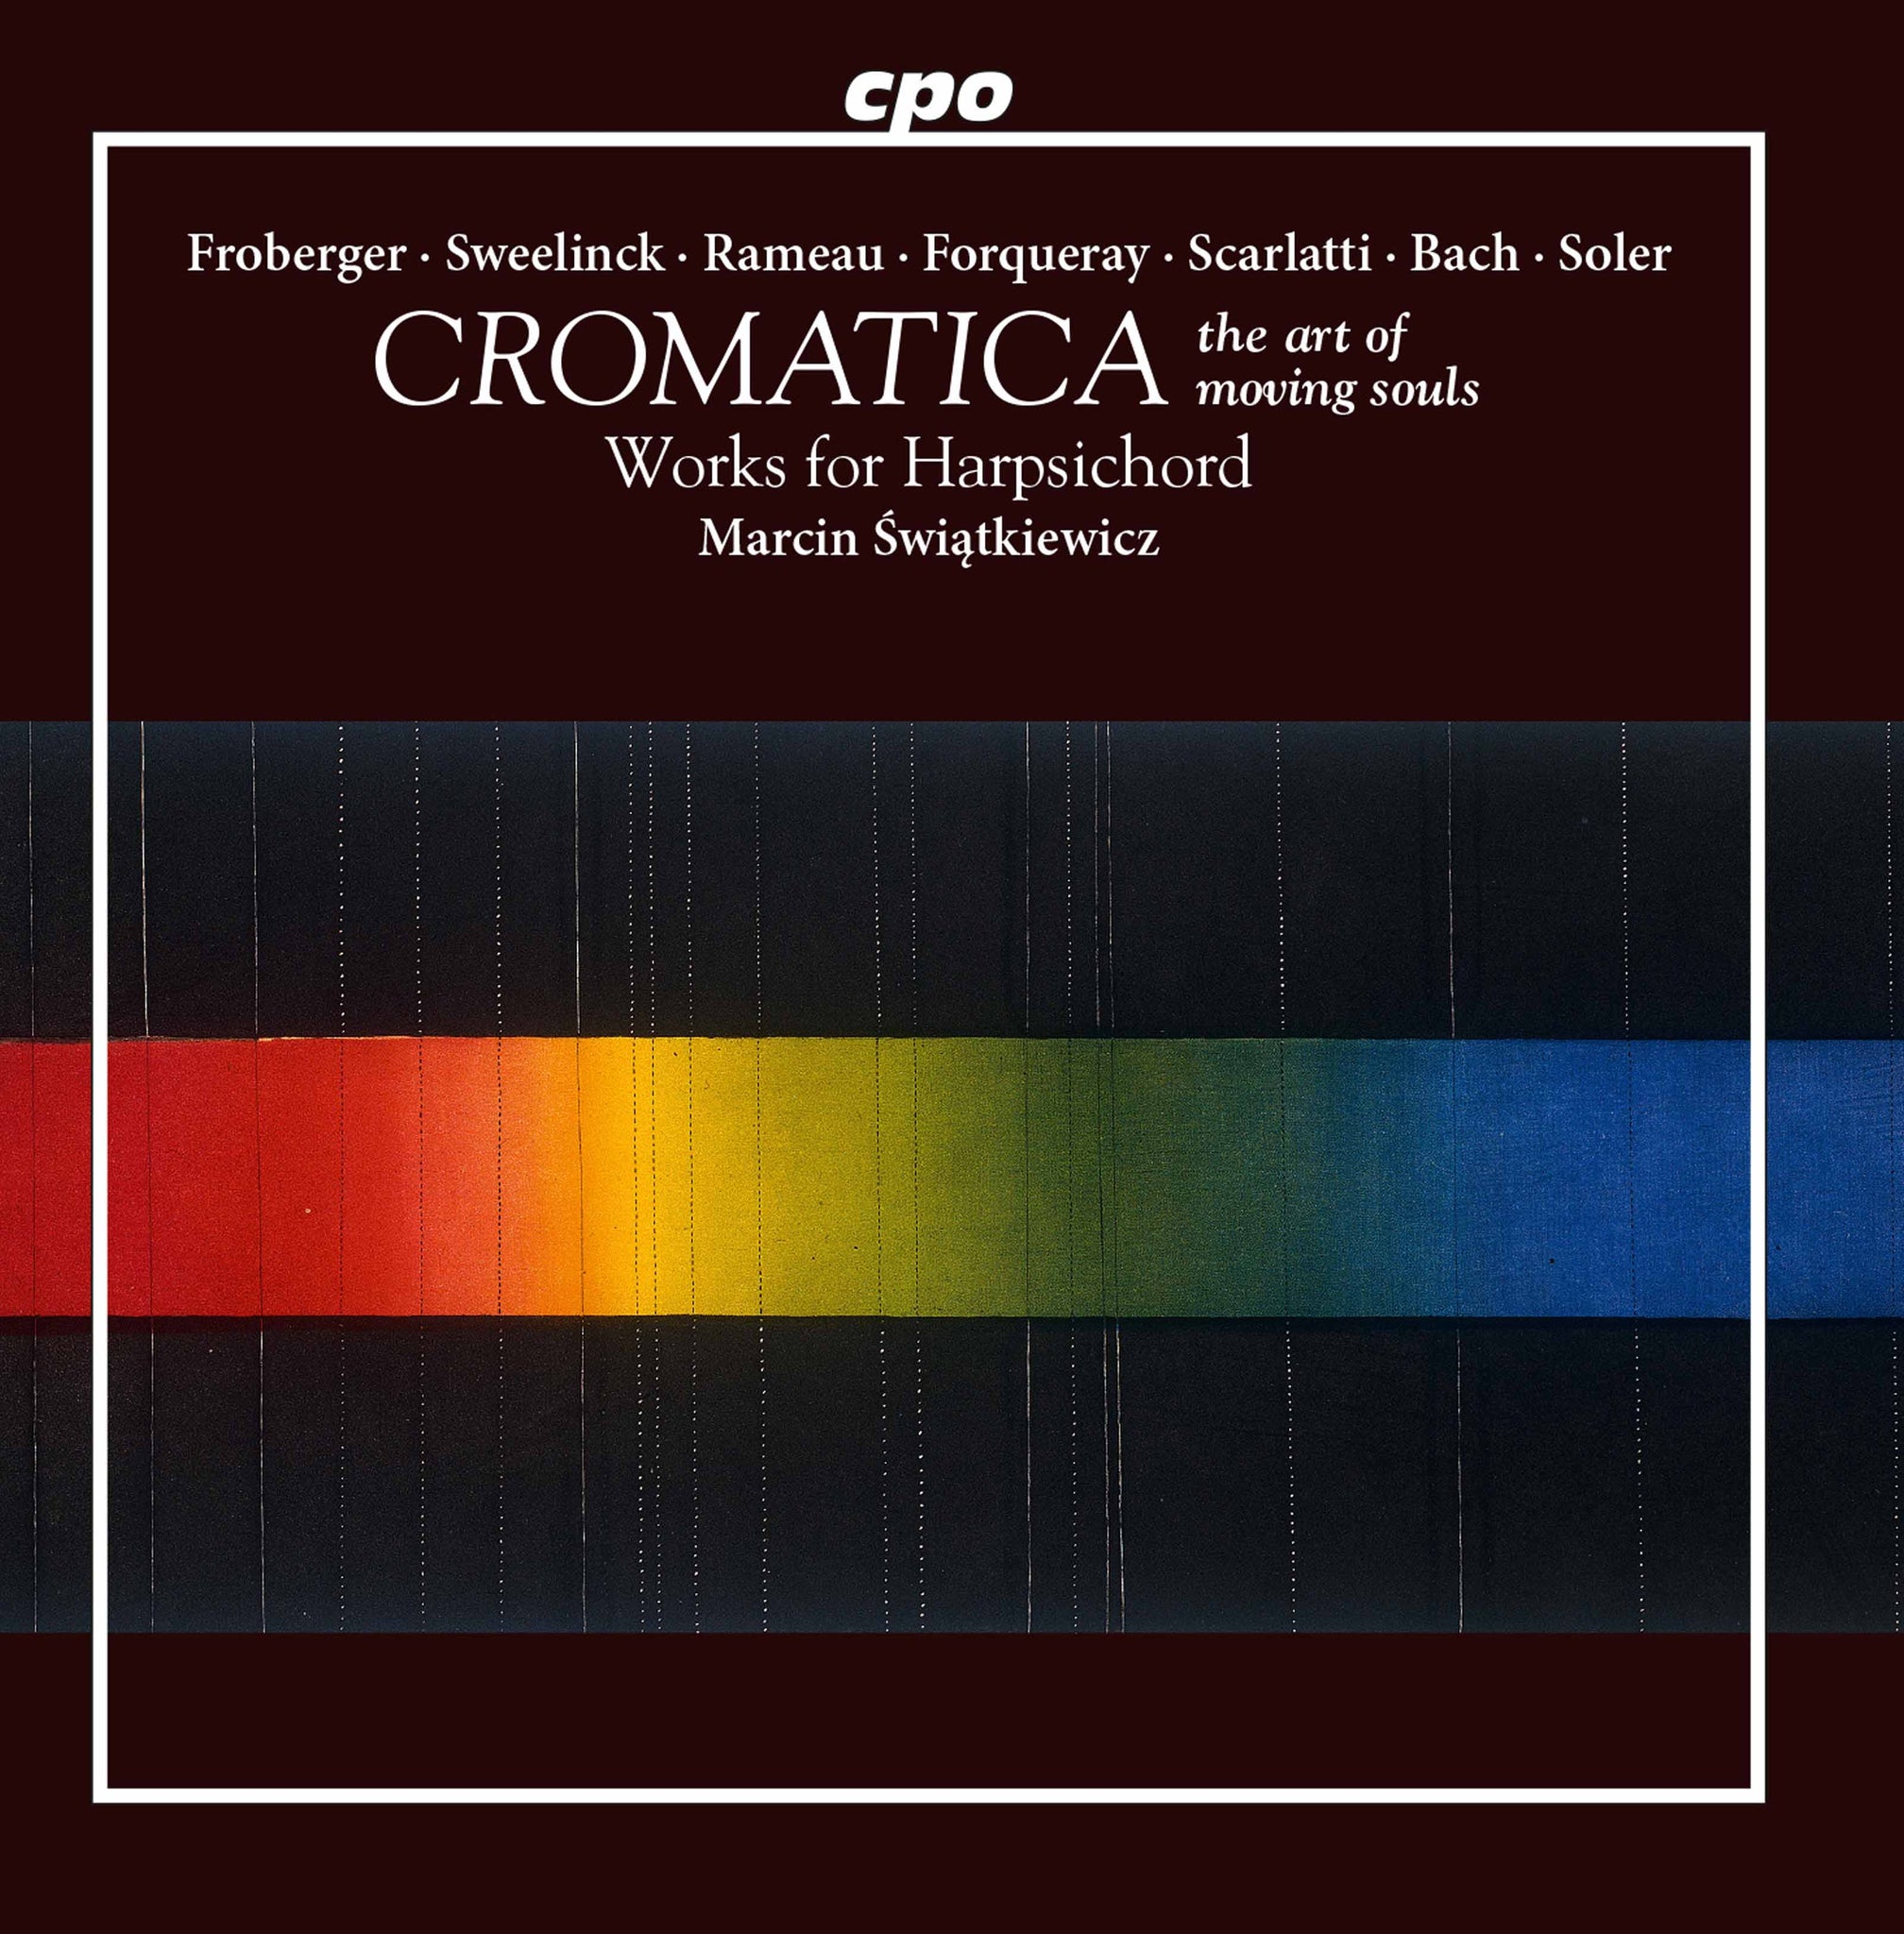 Cromatica: The Art Of Moving Souls – Works For Harpsichord / Swiatkiewicz